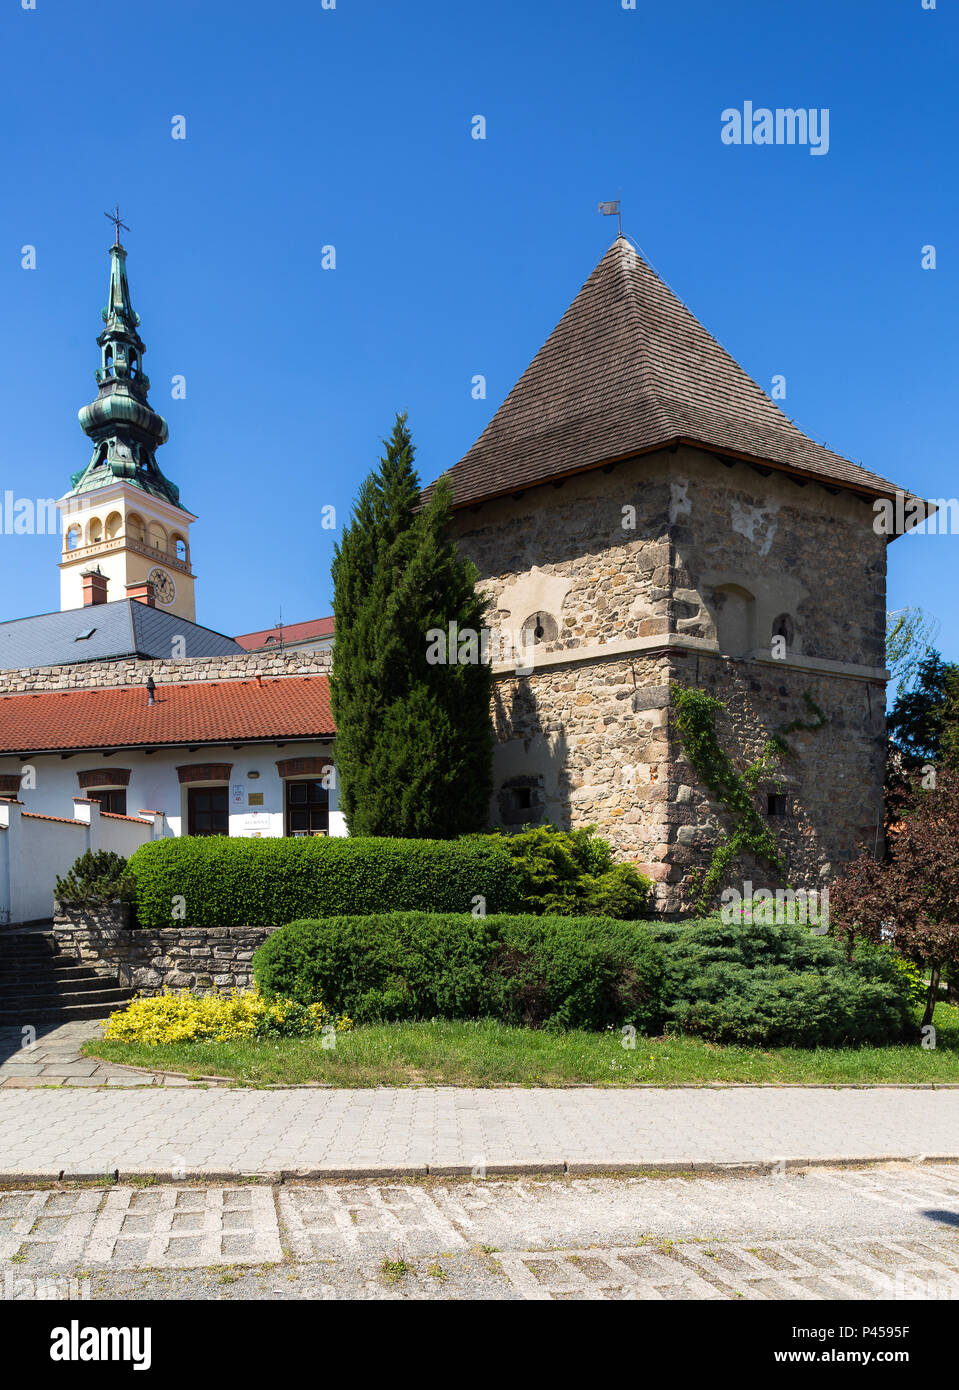 06 May 2018, Novy Jicin, Czech Republic. Old turret and Church of the Assumption of the Virgin Mary Stock Photo